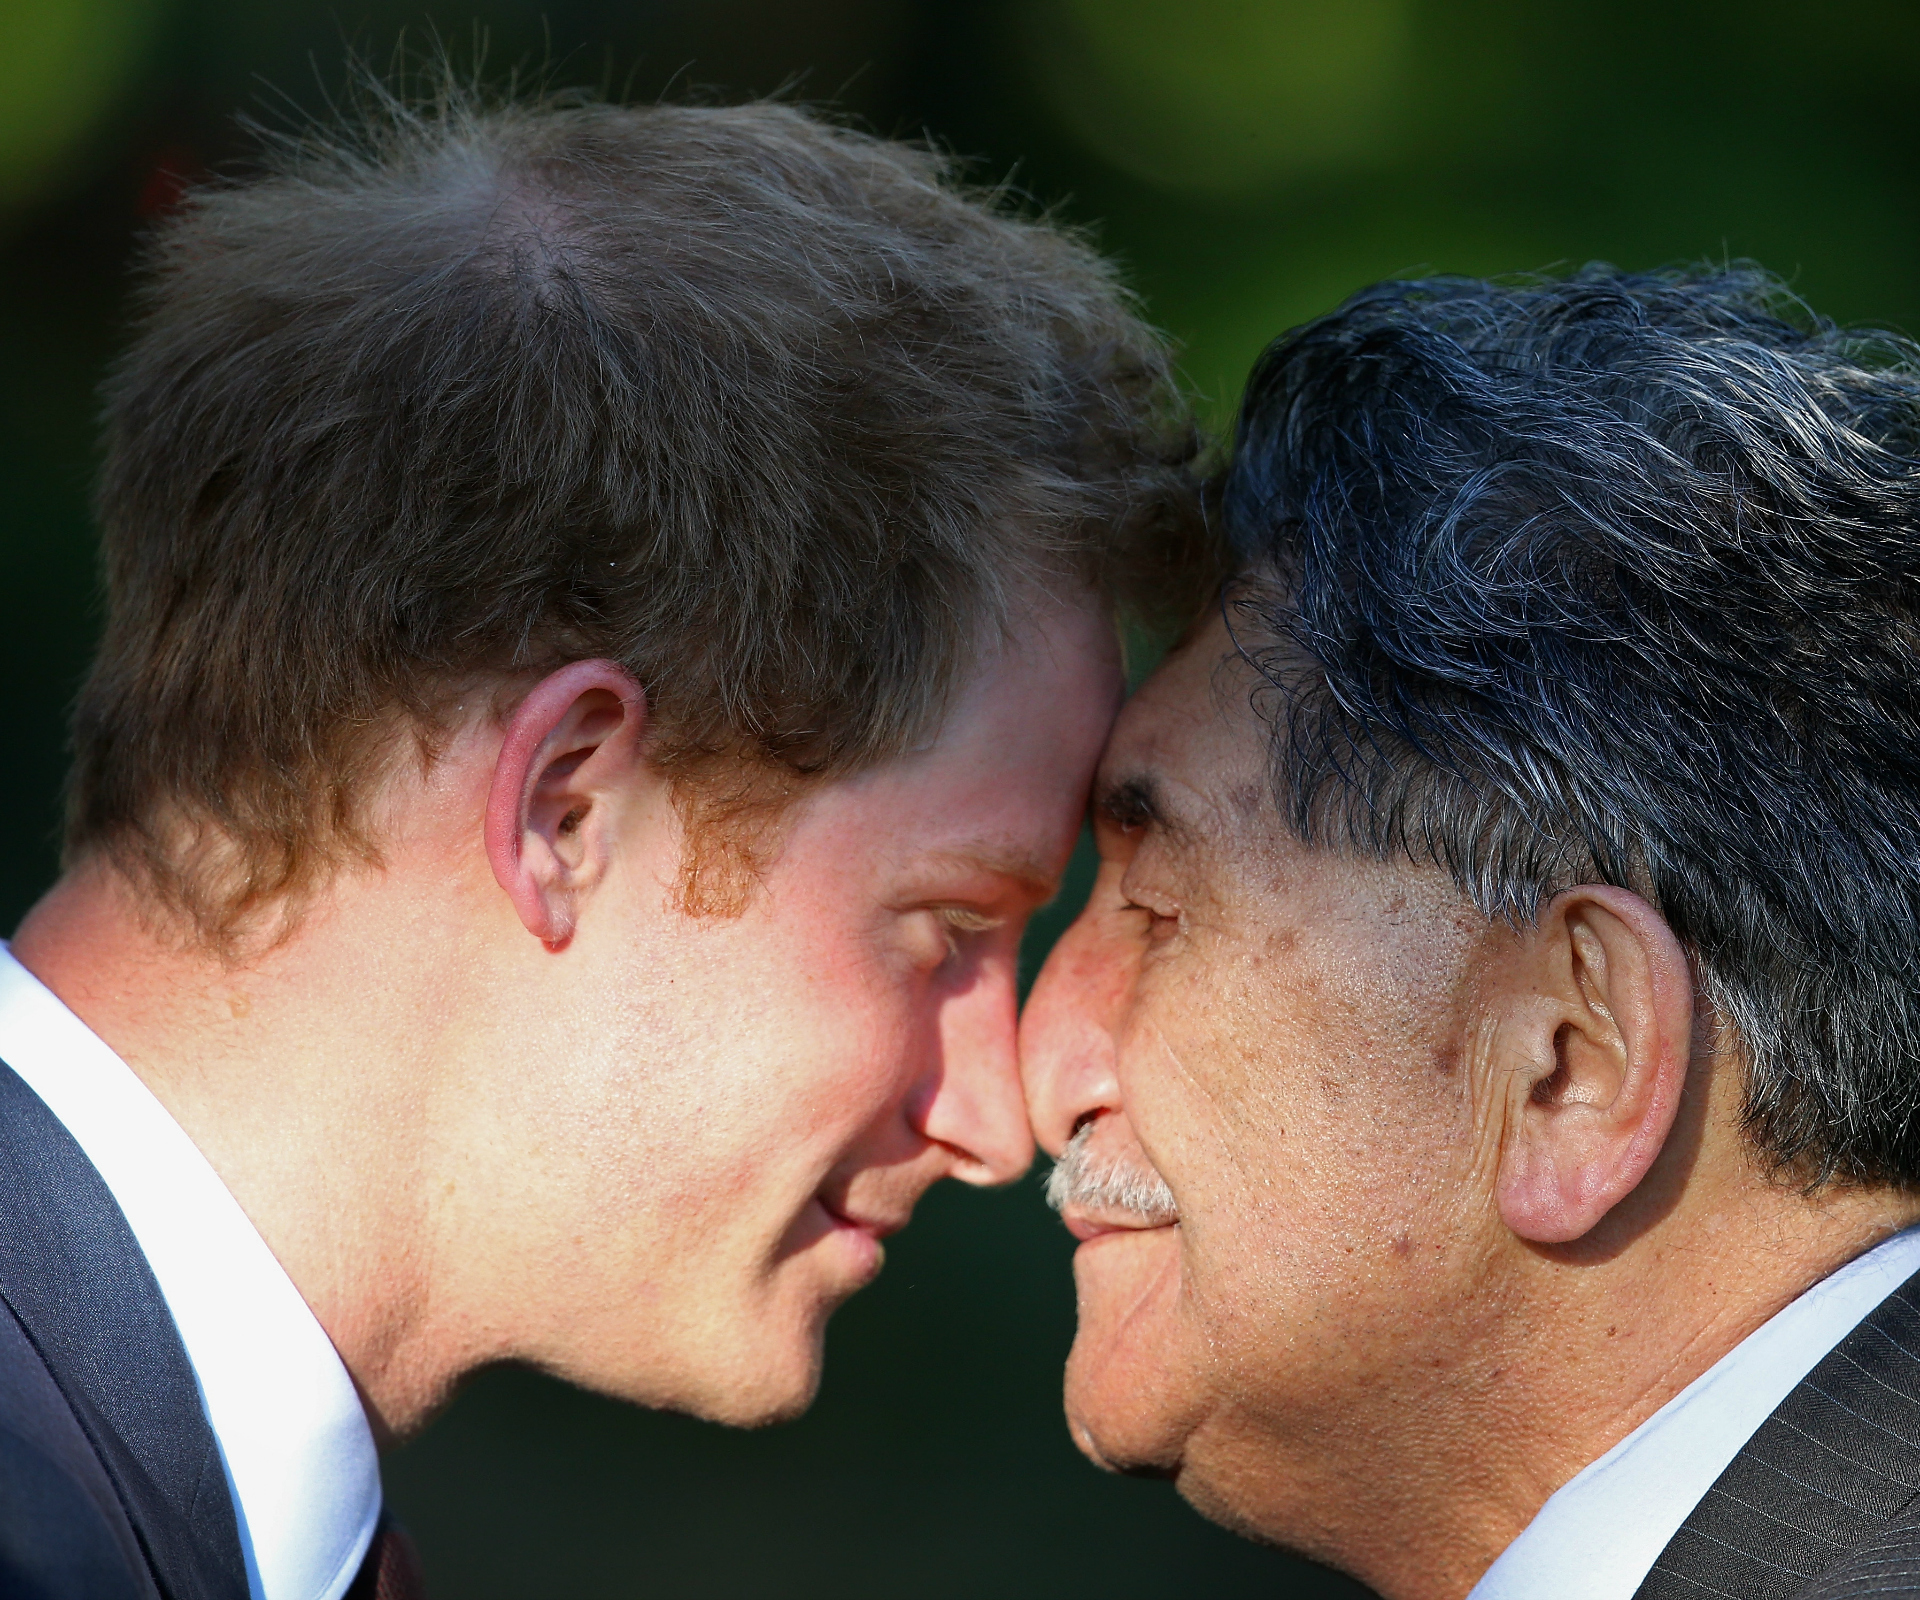 Rubbing noses with Prince Harry